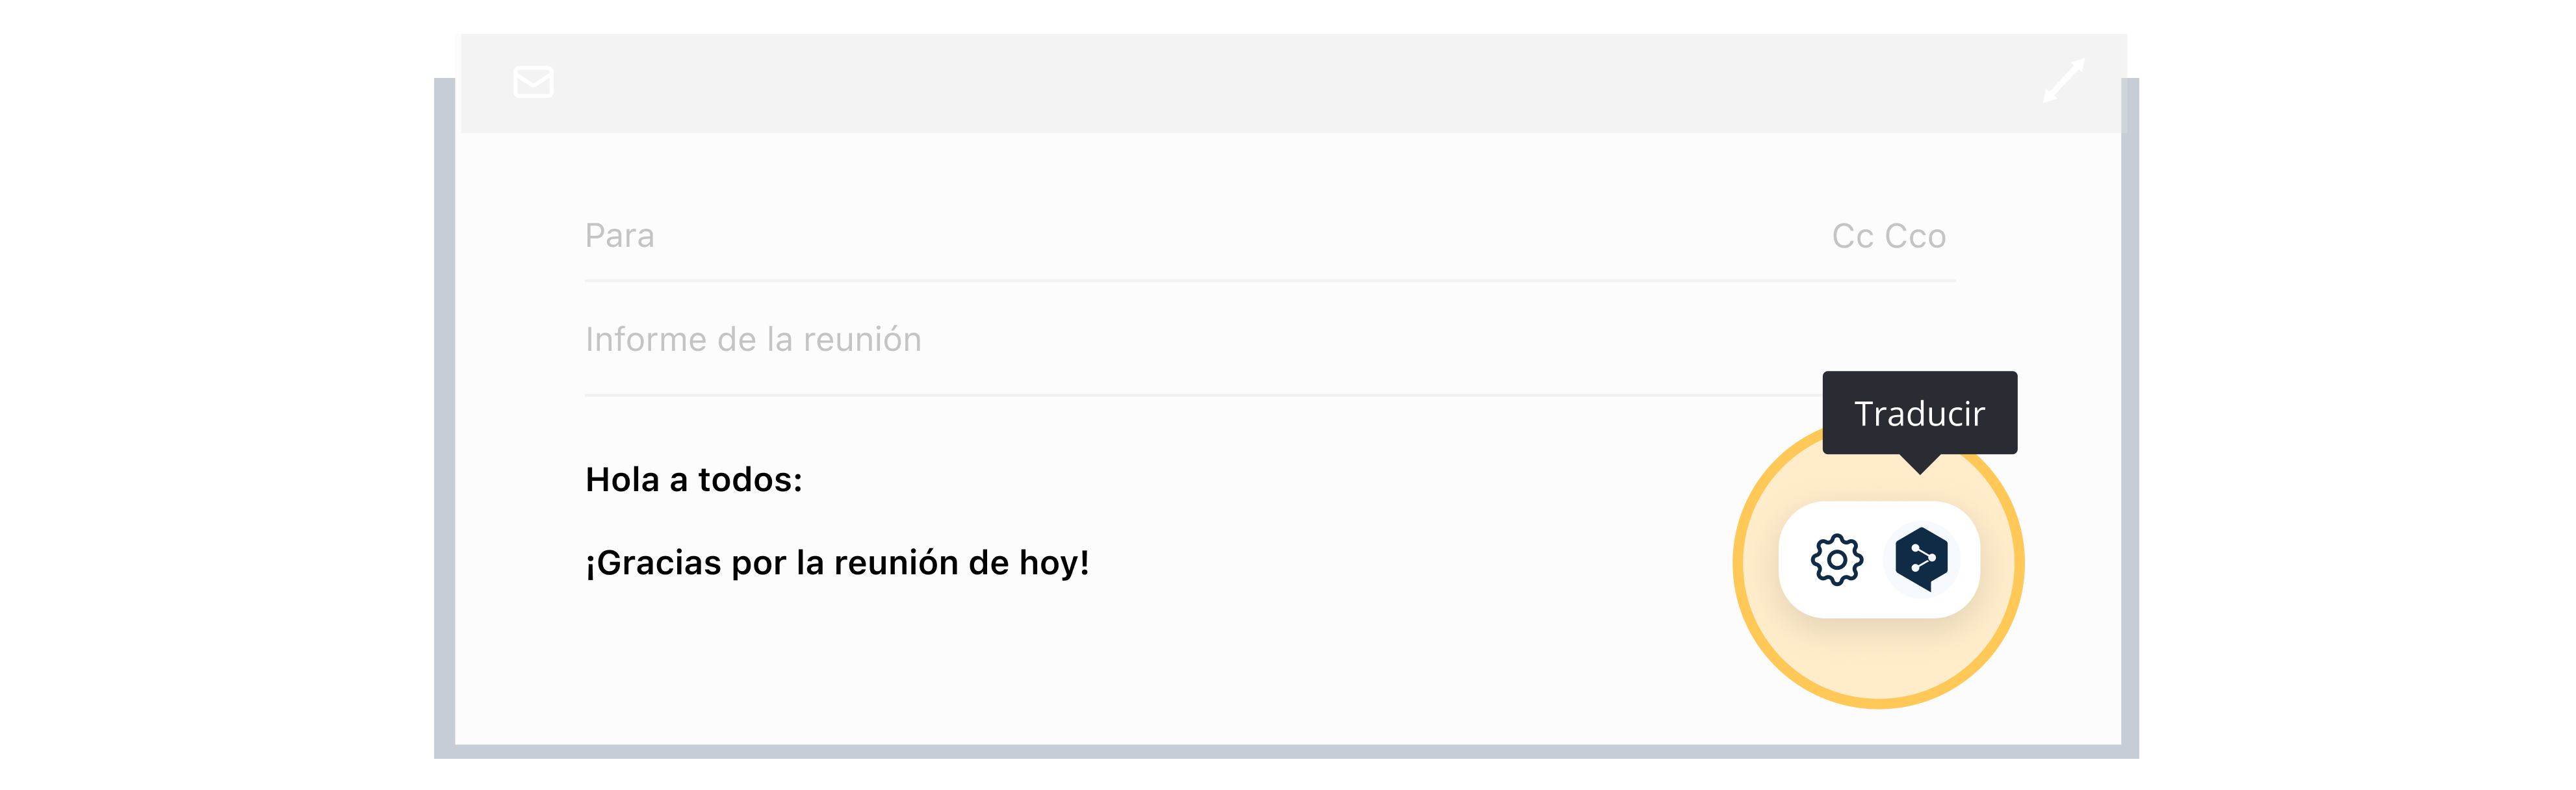 A sample email with the subject line "Hi team, thank you for a product meeting today!" to the right you can click on the translate icon to translate this email to a different language.